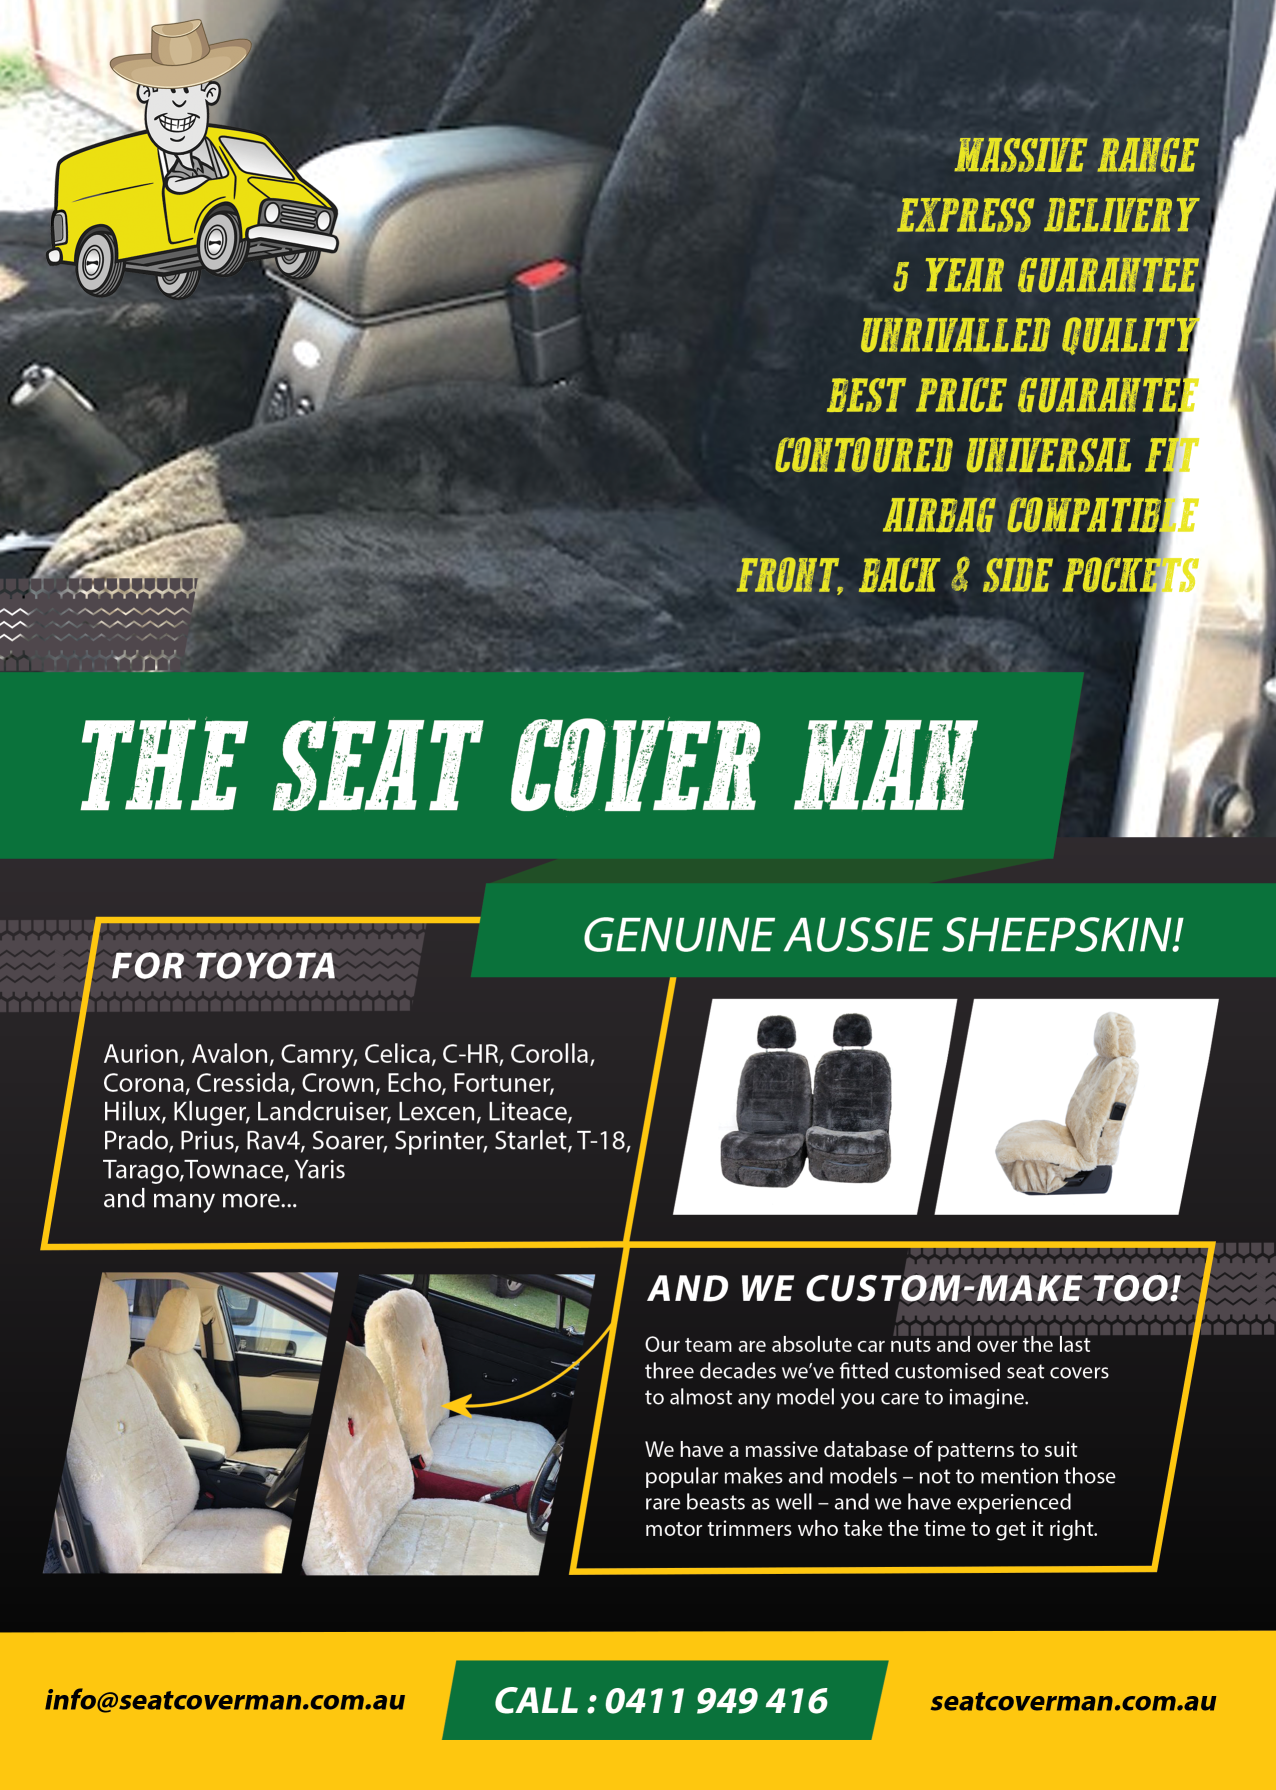 Sheepskin Seat Covers for Toyota by The Seat Cover Man